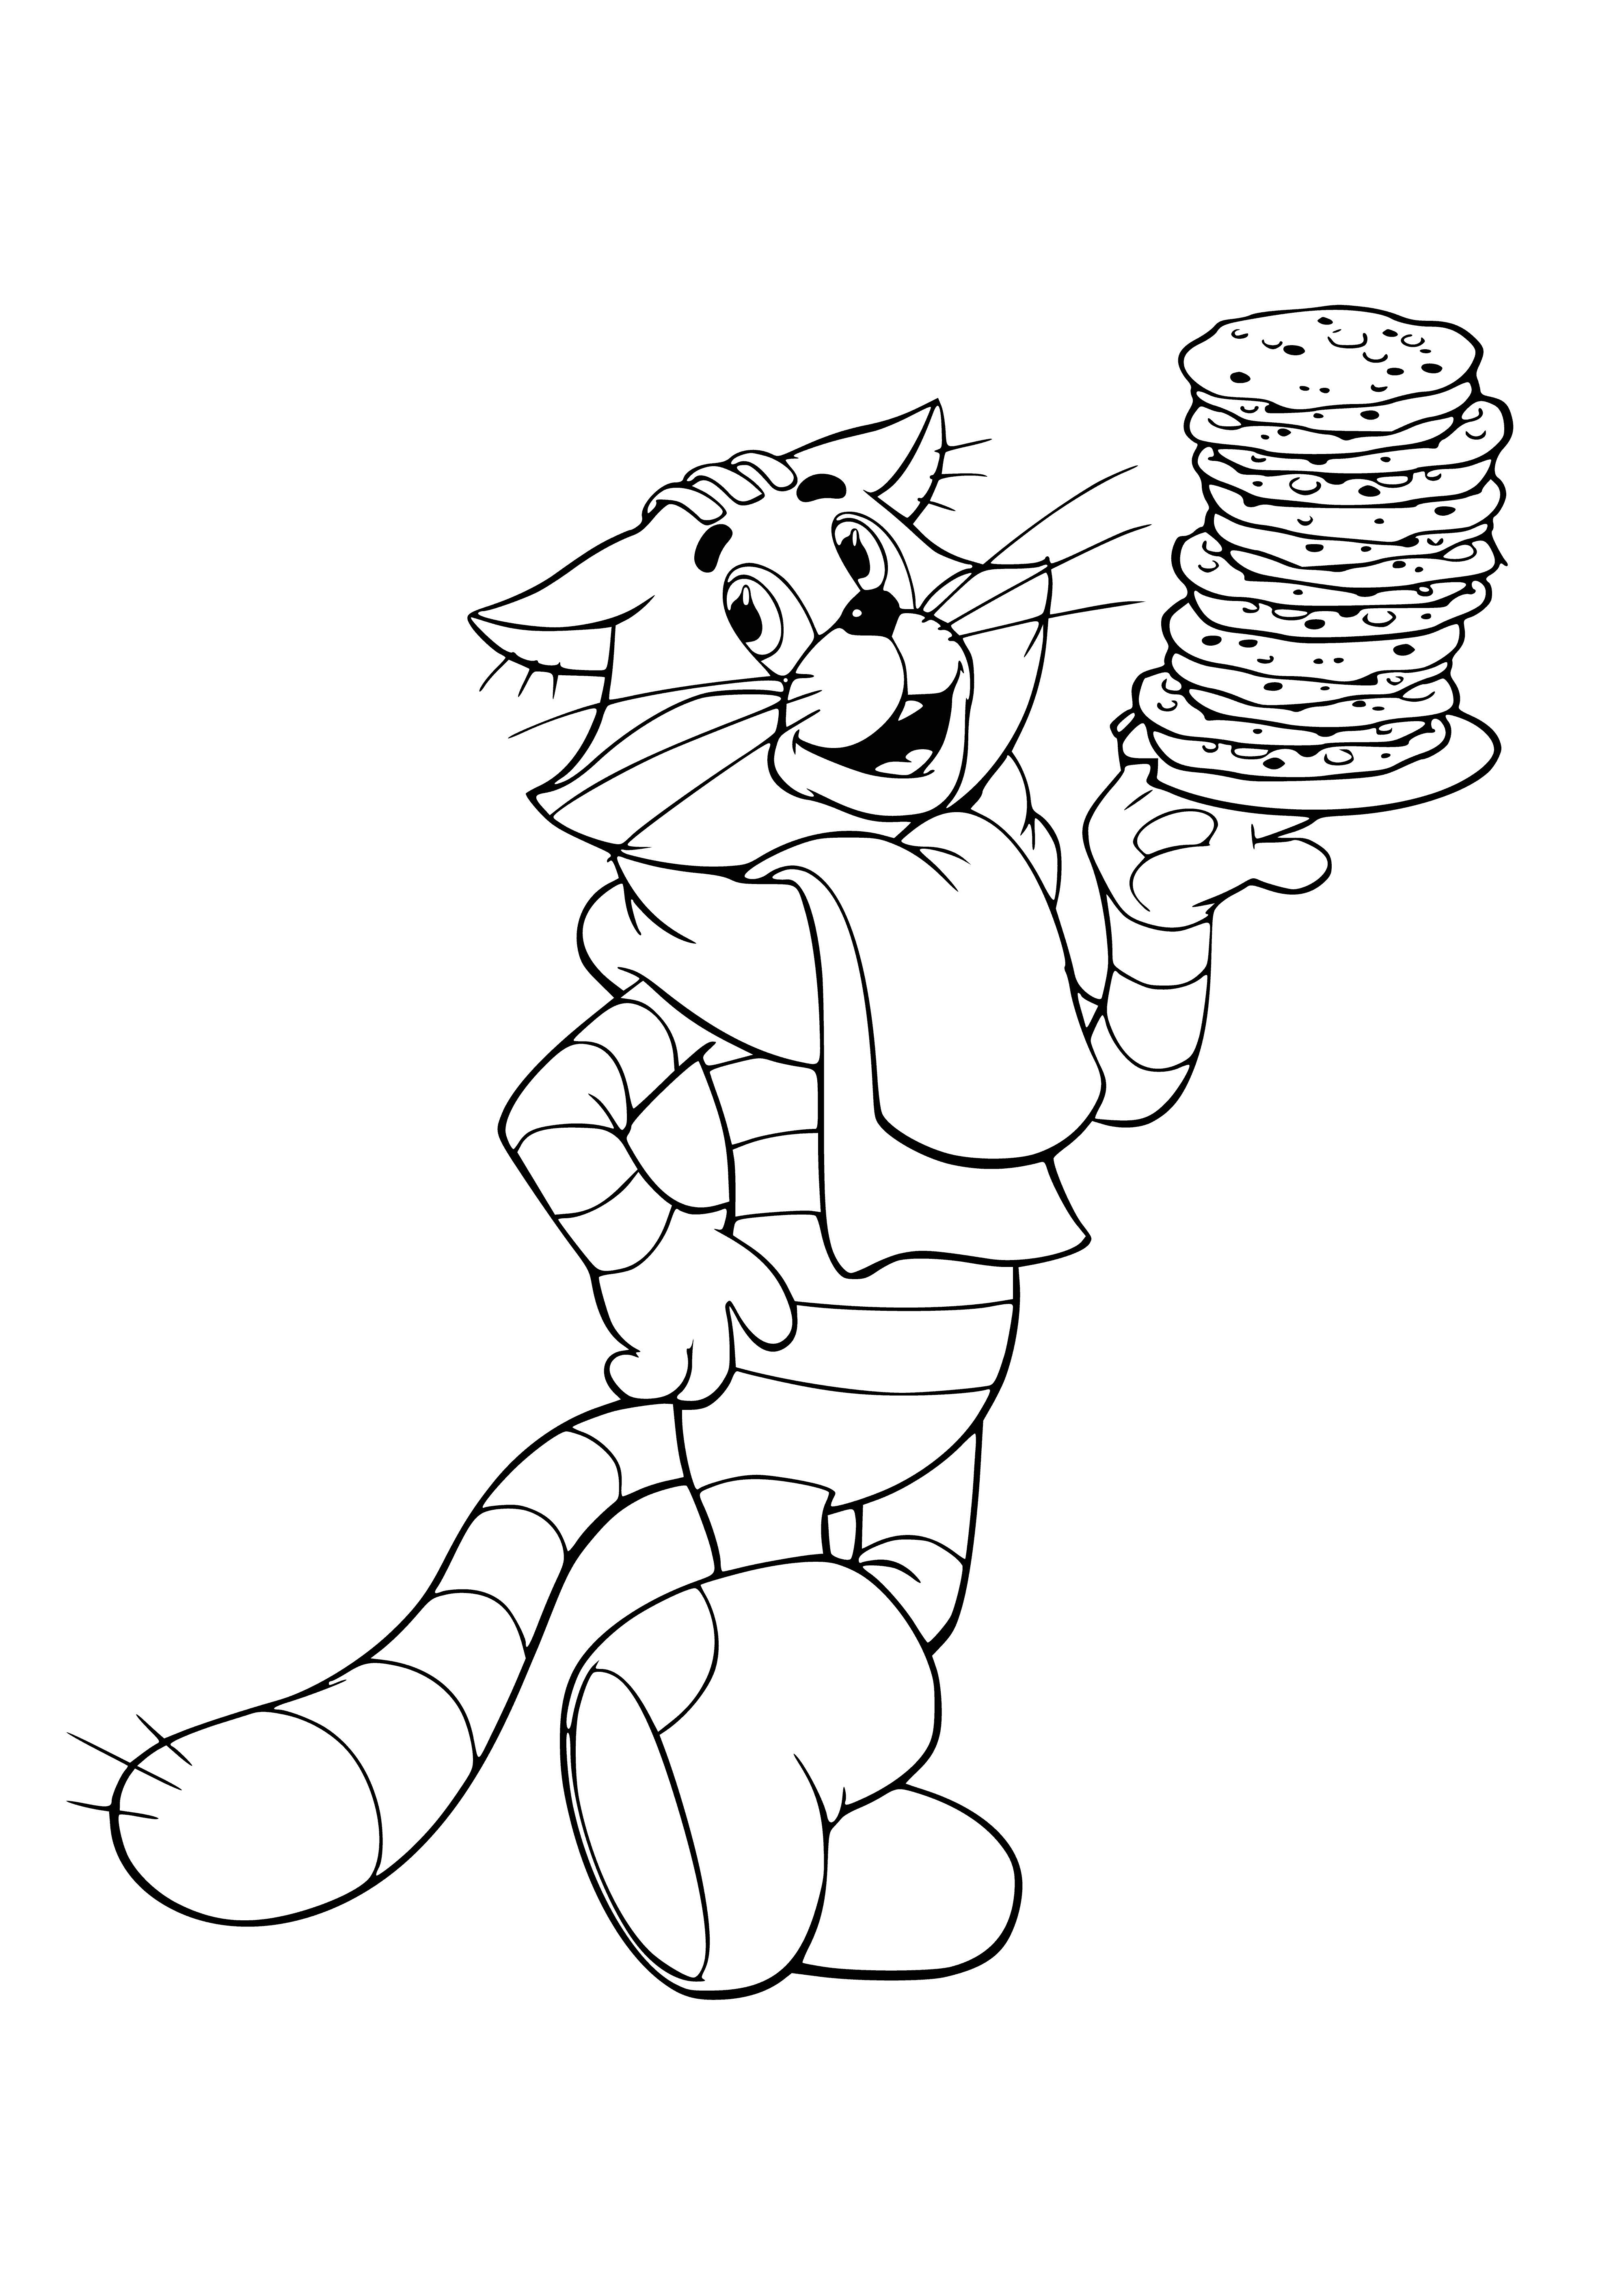 coloring page: Matroskin is baking pancakes and flipping them onto a plate with fork and knife. #CatsCooking